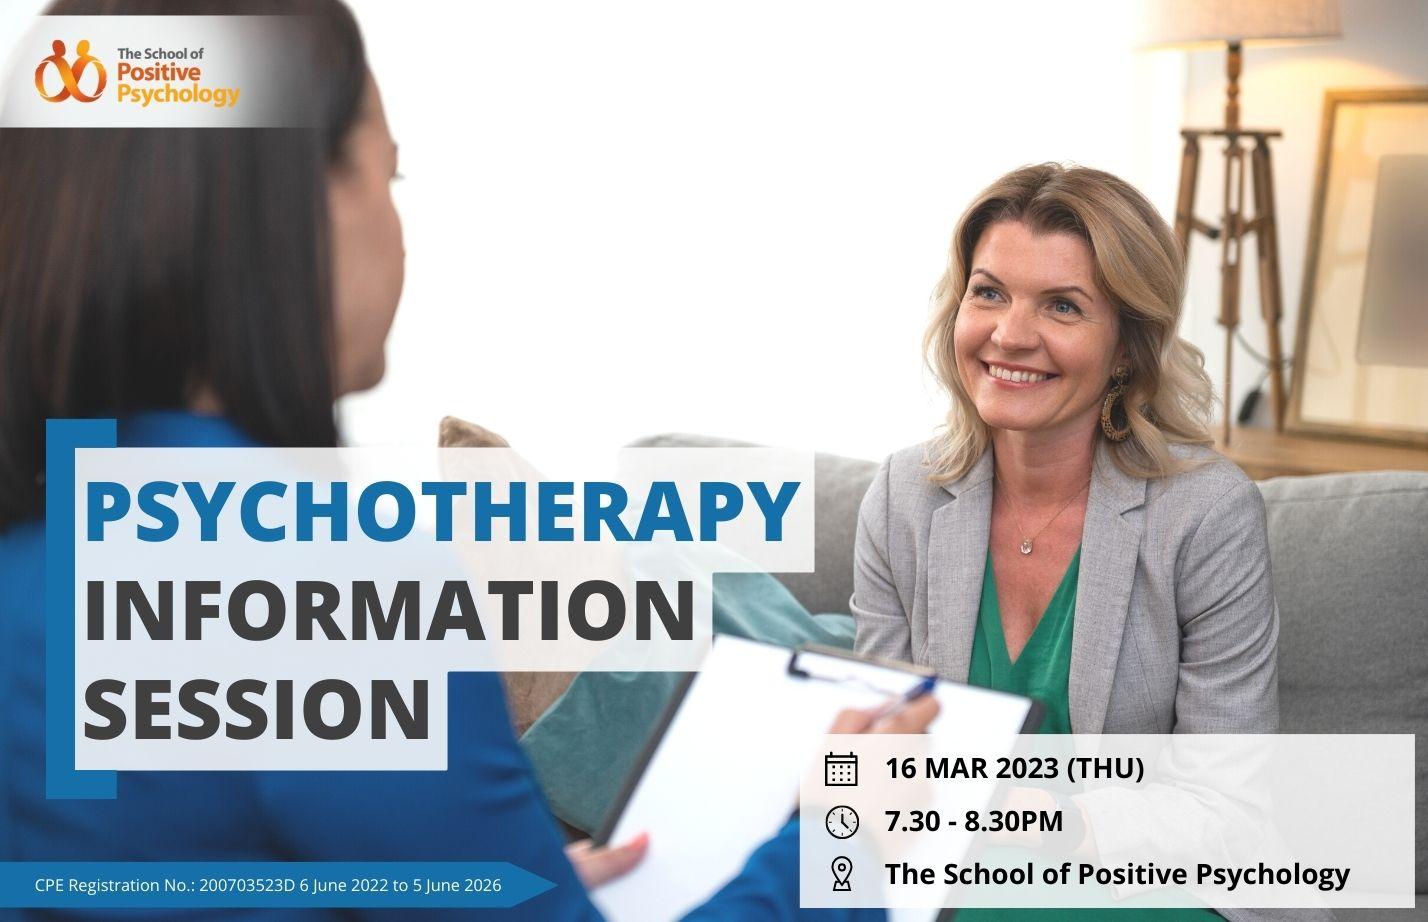 Psychotherapy Information Session – 16 Mar 2023